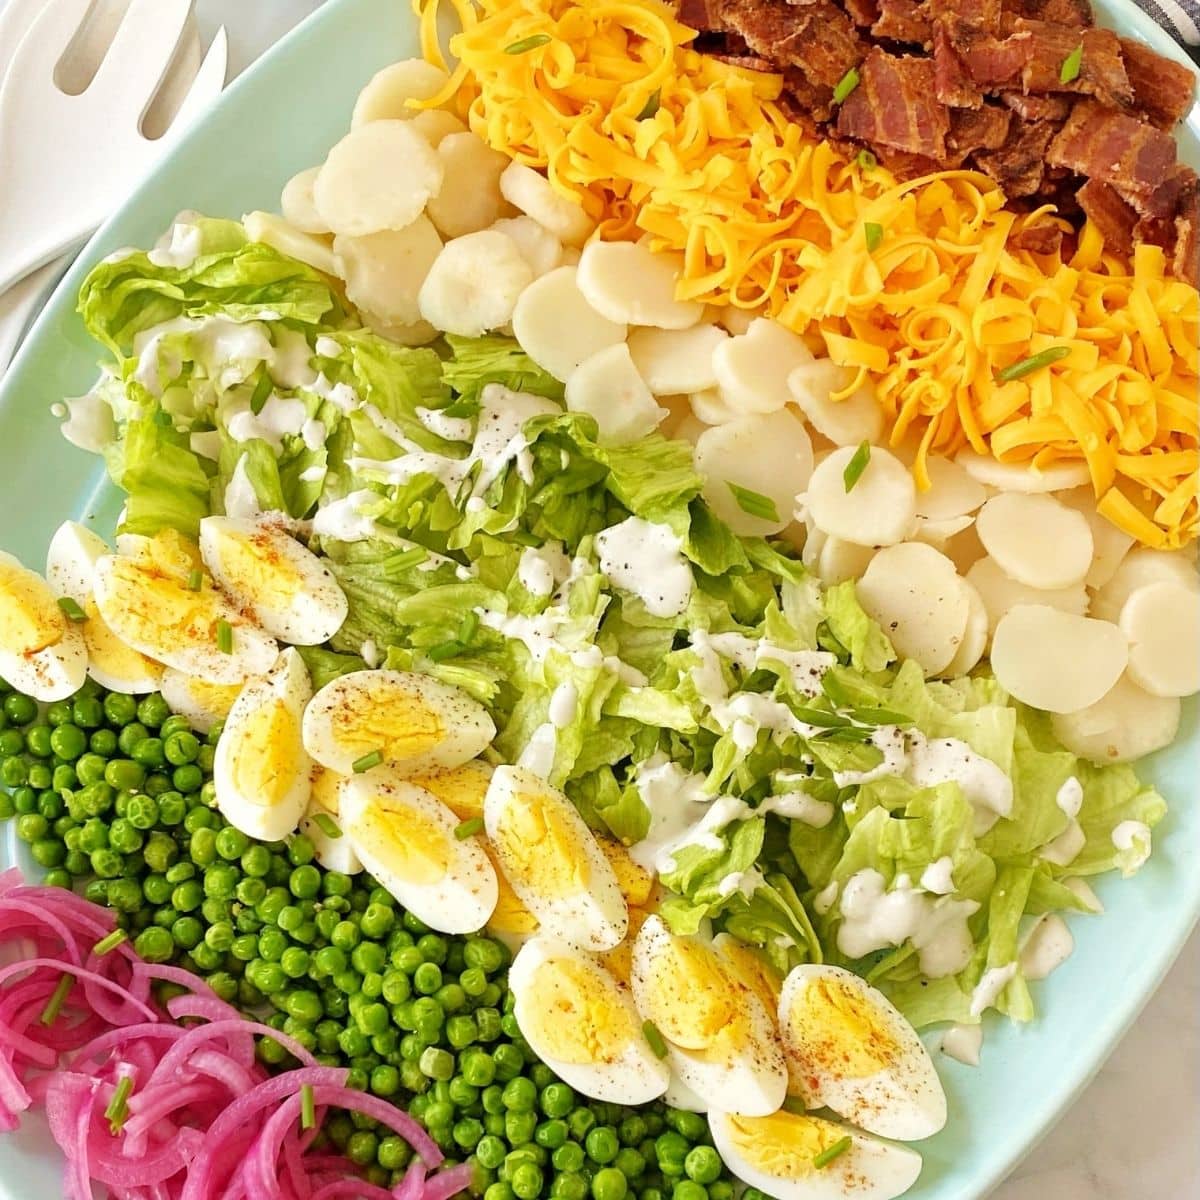 https://mycasualpantry.com/wp-content/uploads/2022/03/Seven-Layer-Salad-feat.jpg